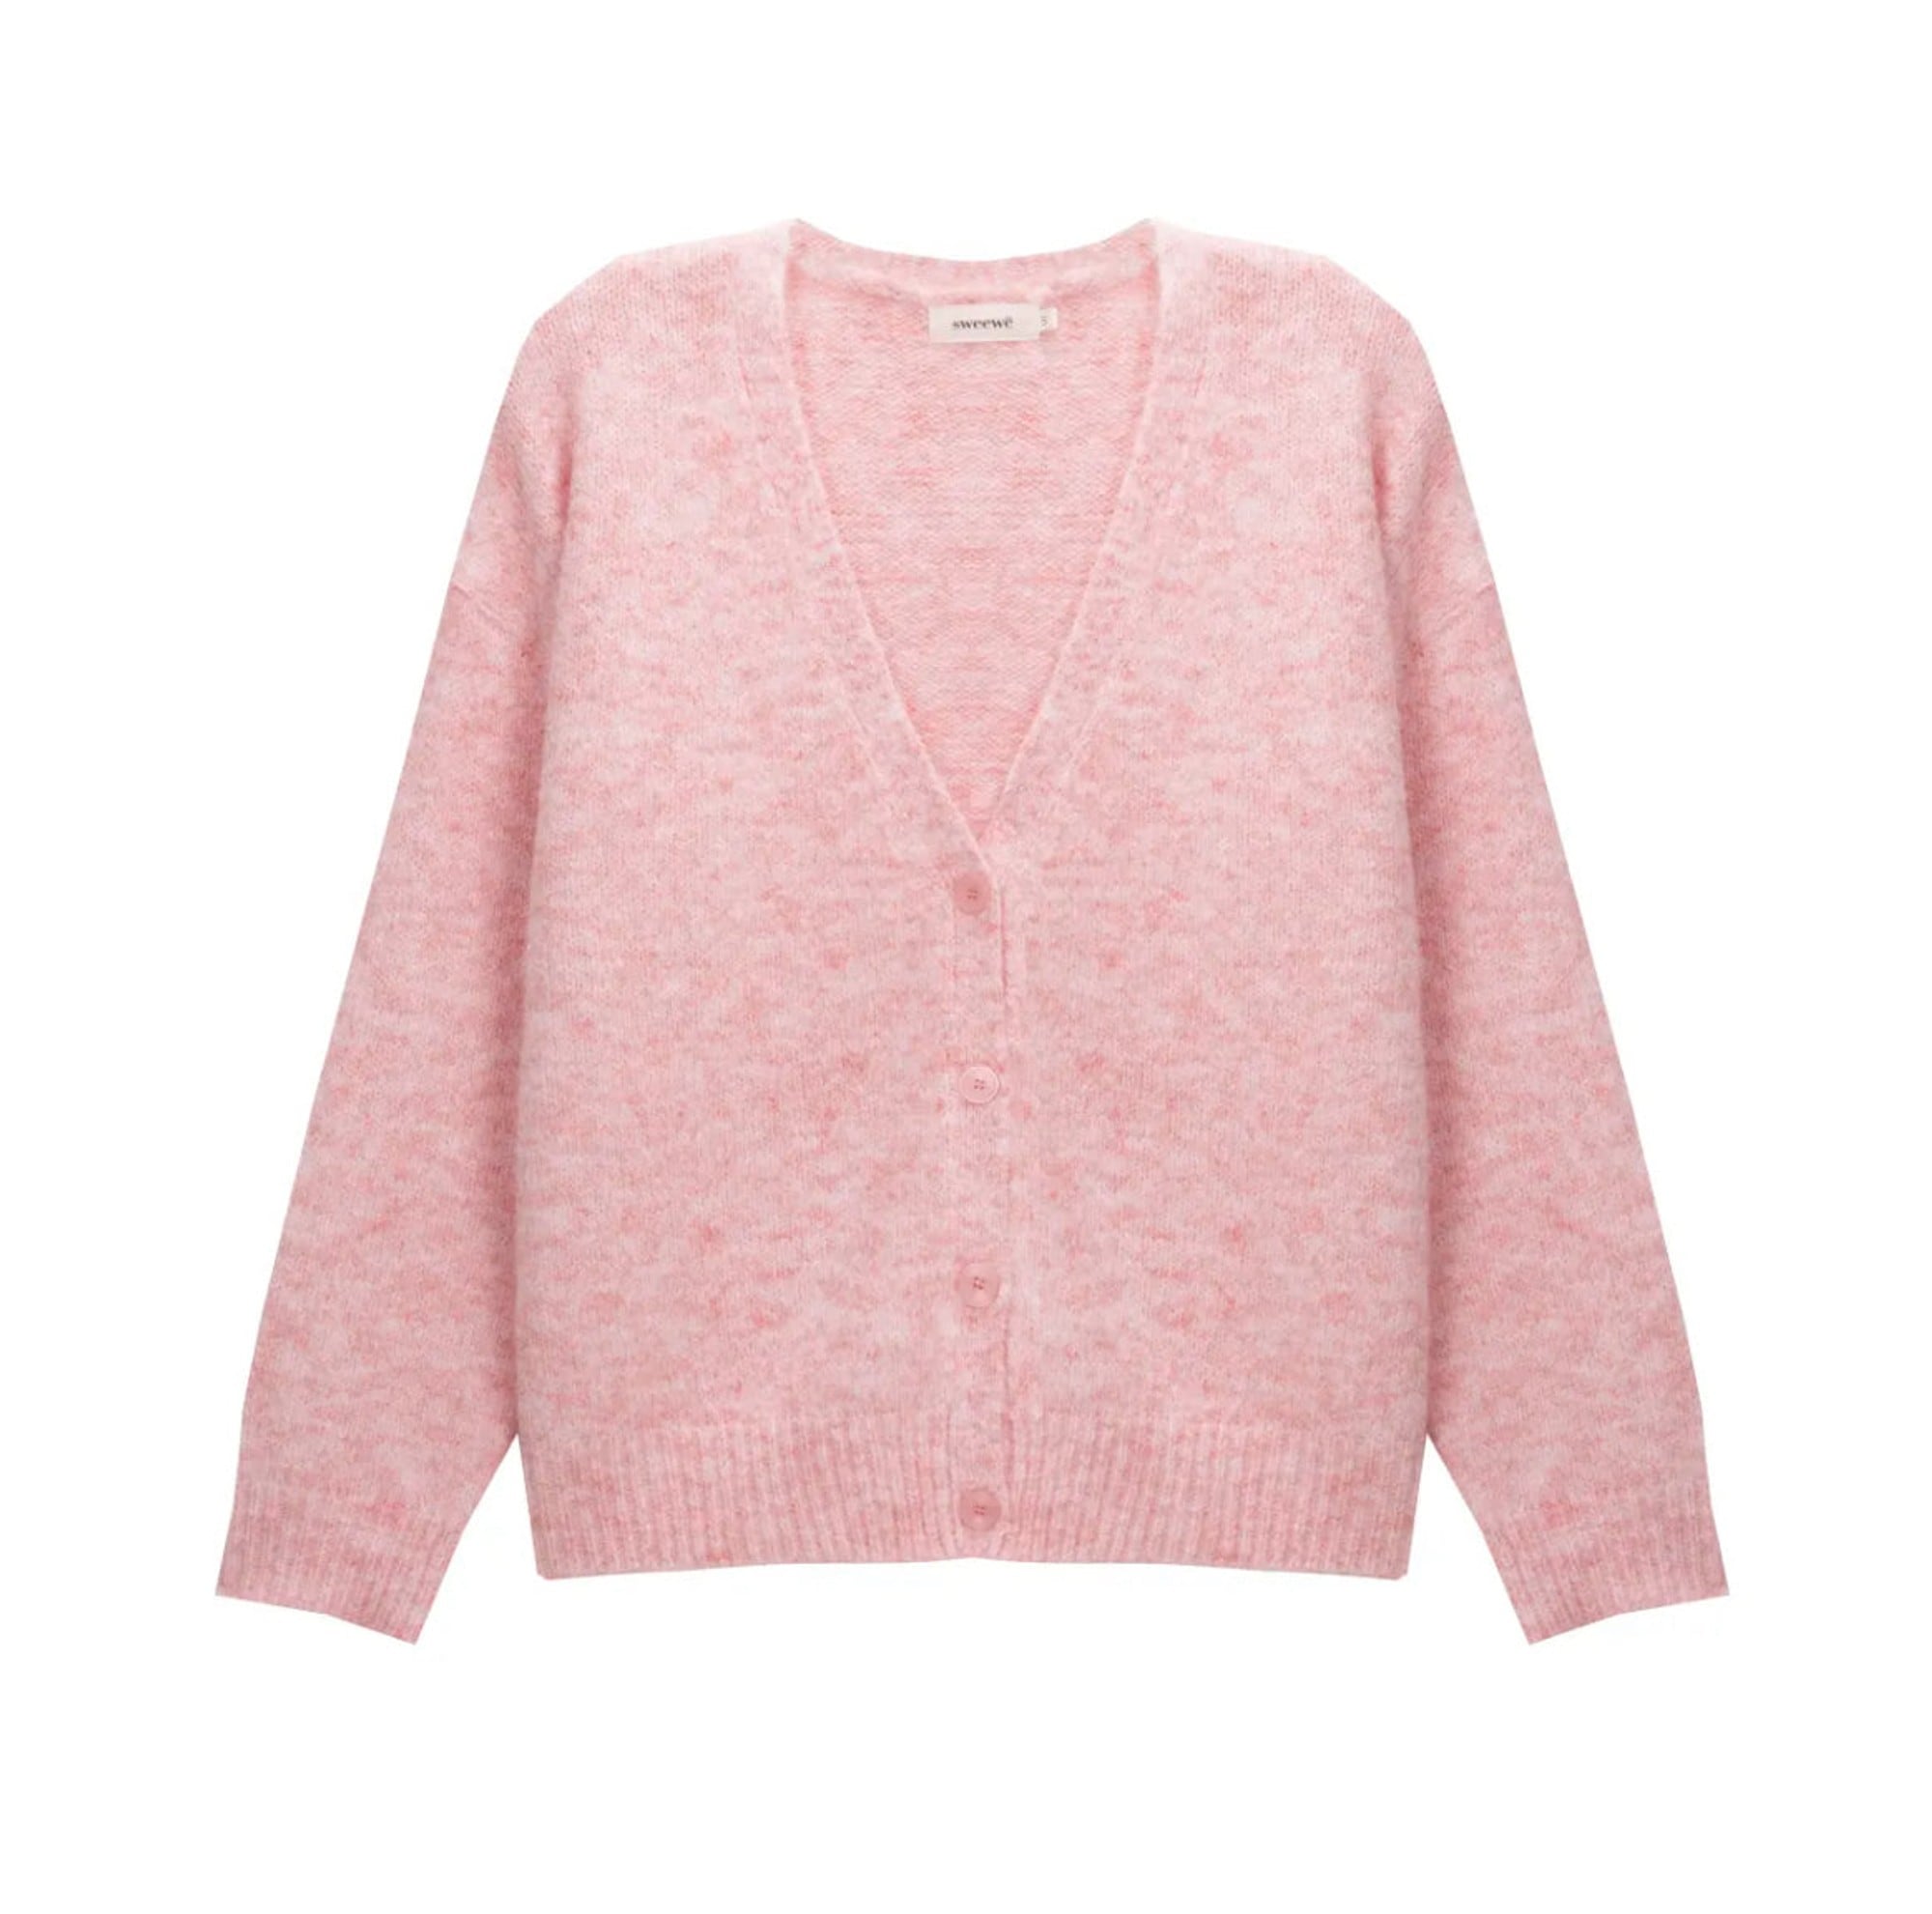 Sweewe Paris Candy Cardigan - clever alice